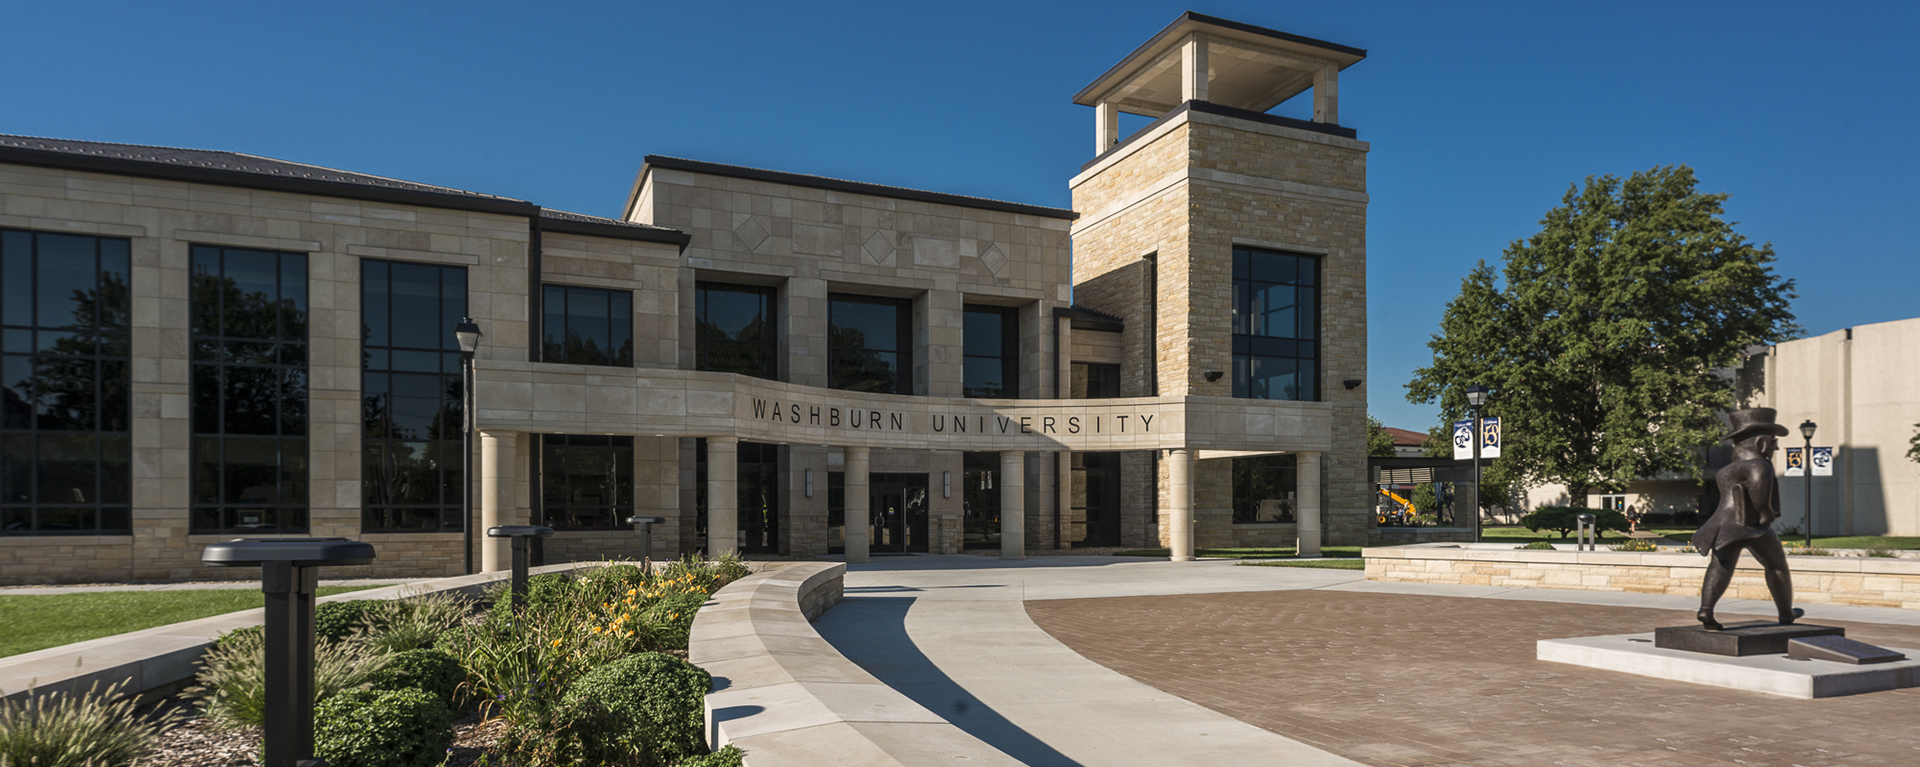 The Welcome Center serves as the main entrance to Washburn and opened in 2015.